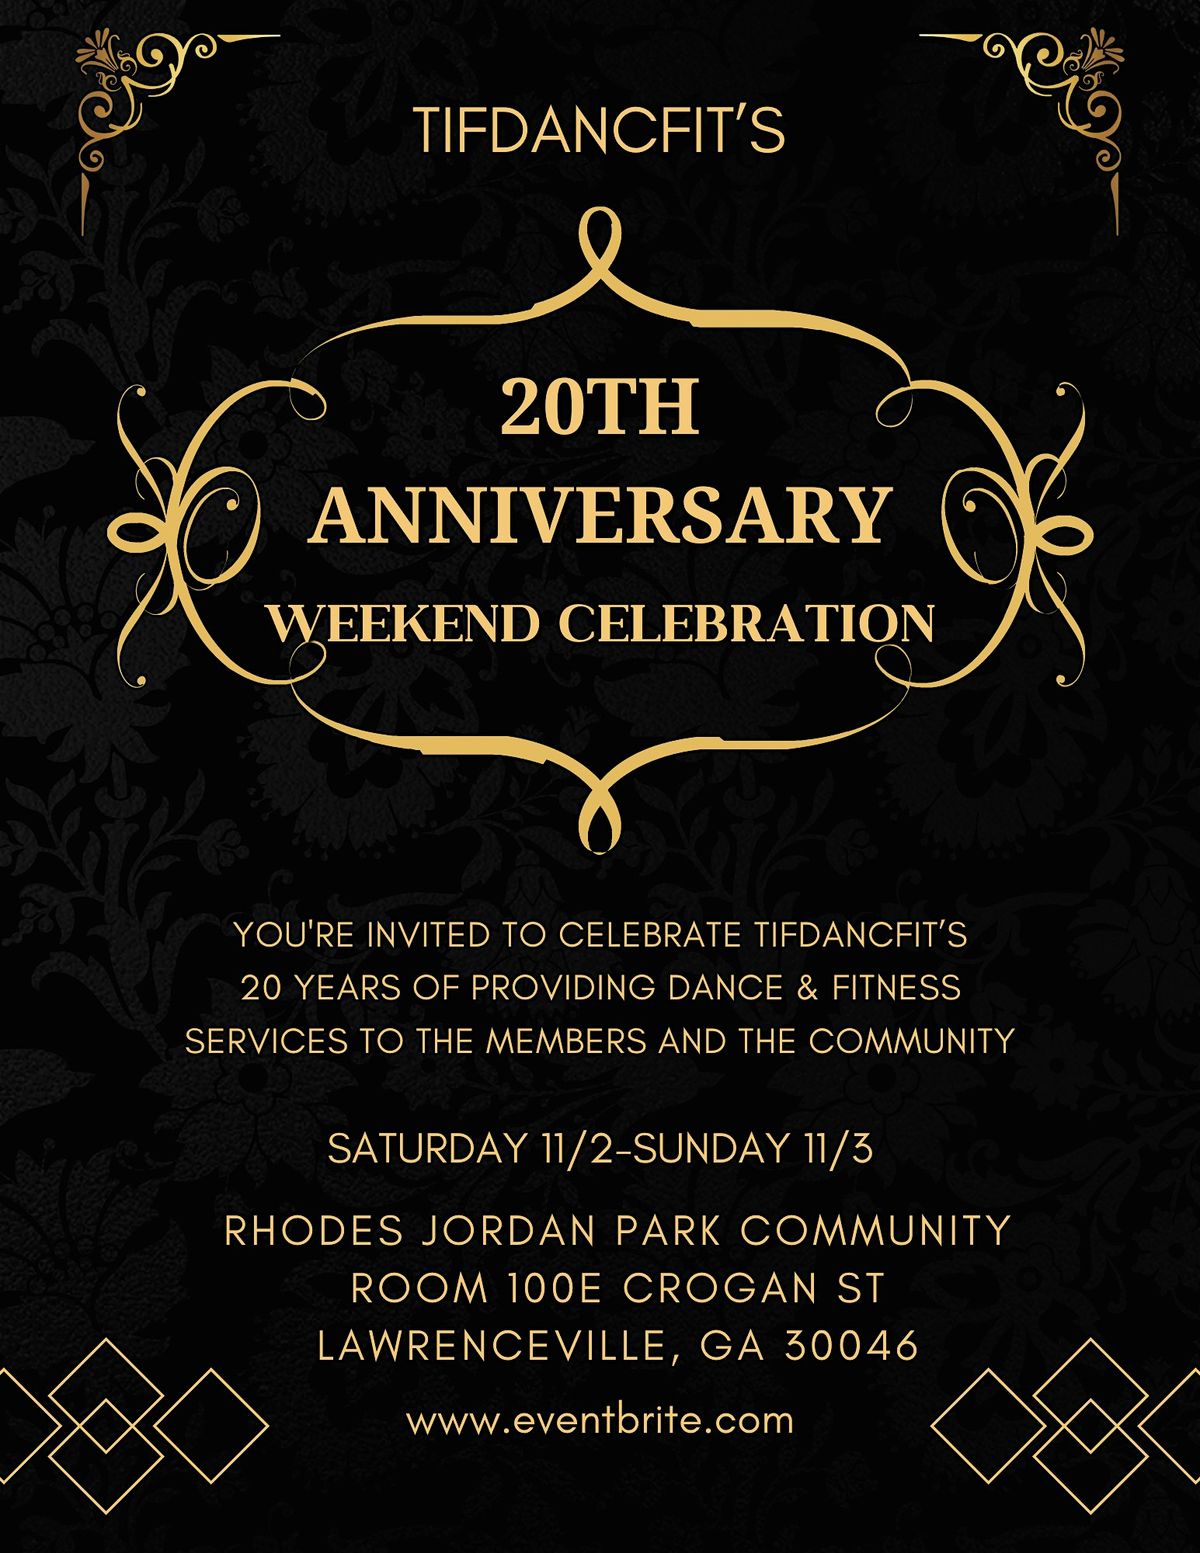 TifDancFit's 20th Anniversary Weekend Celebration:  "The Journey Continues"